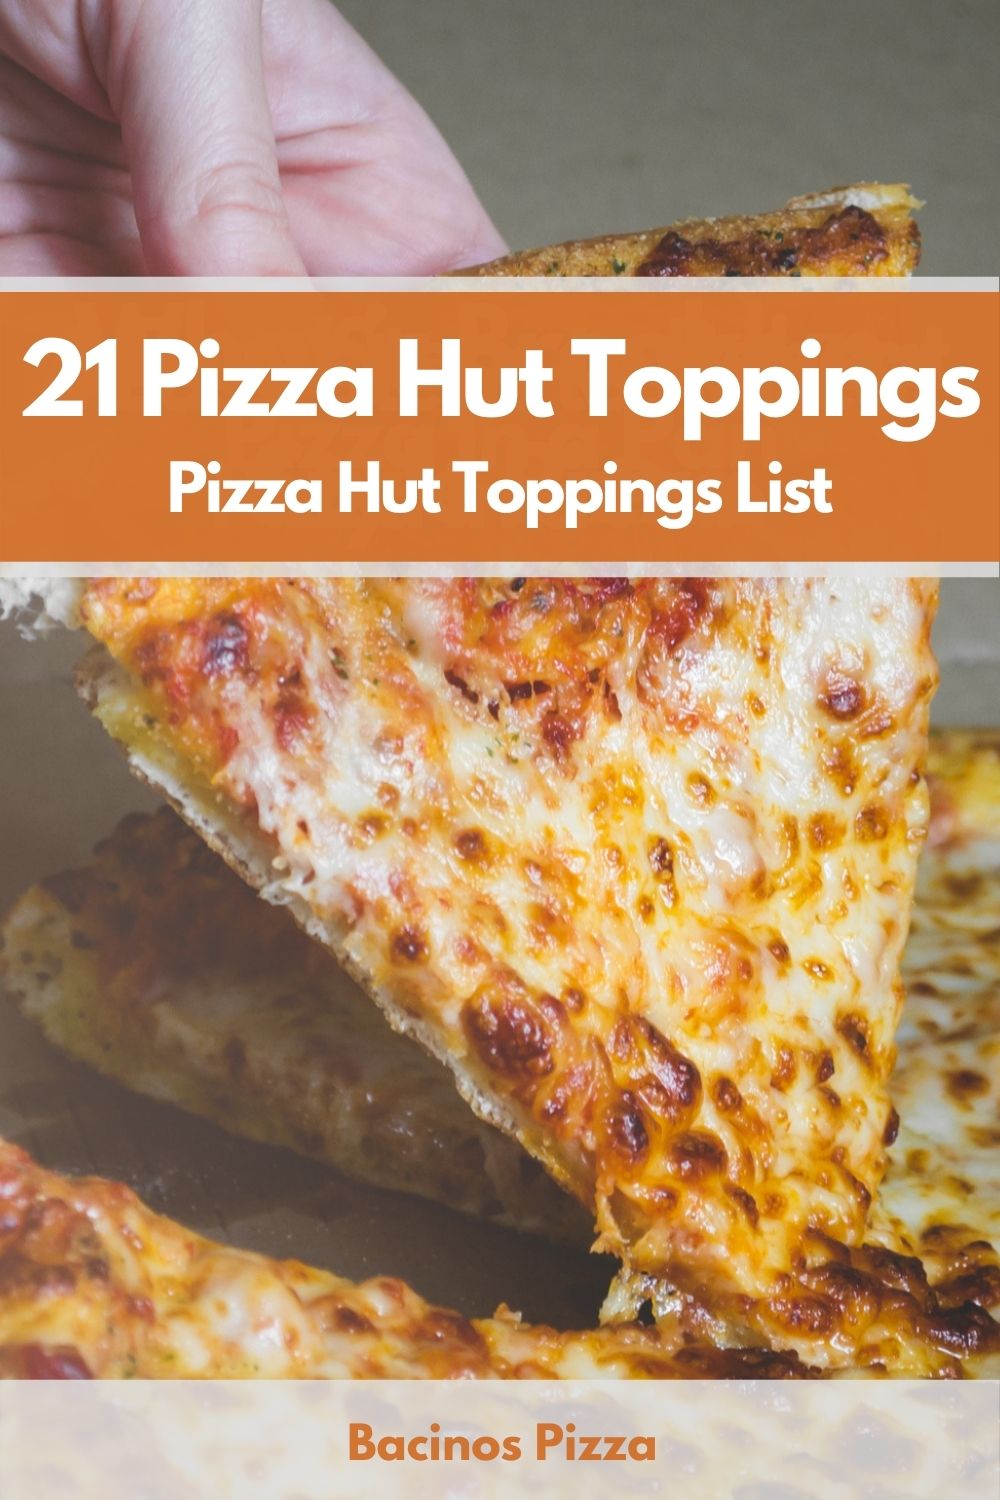 21 Pizza Hut Toppings - Pizza Hut Toppings List pin